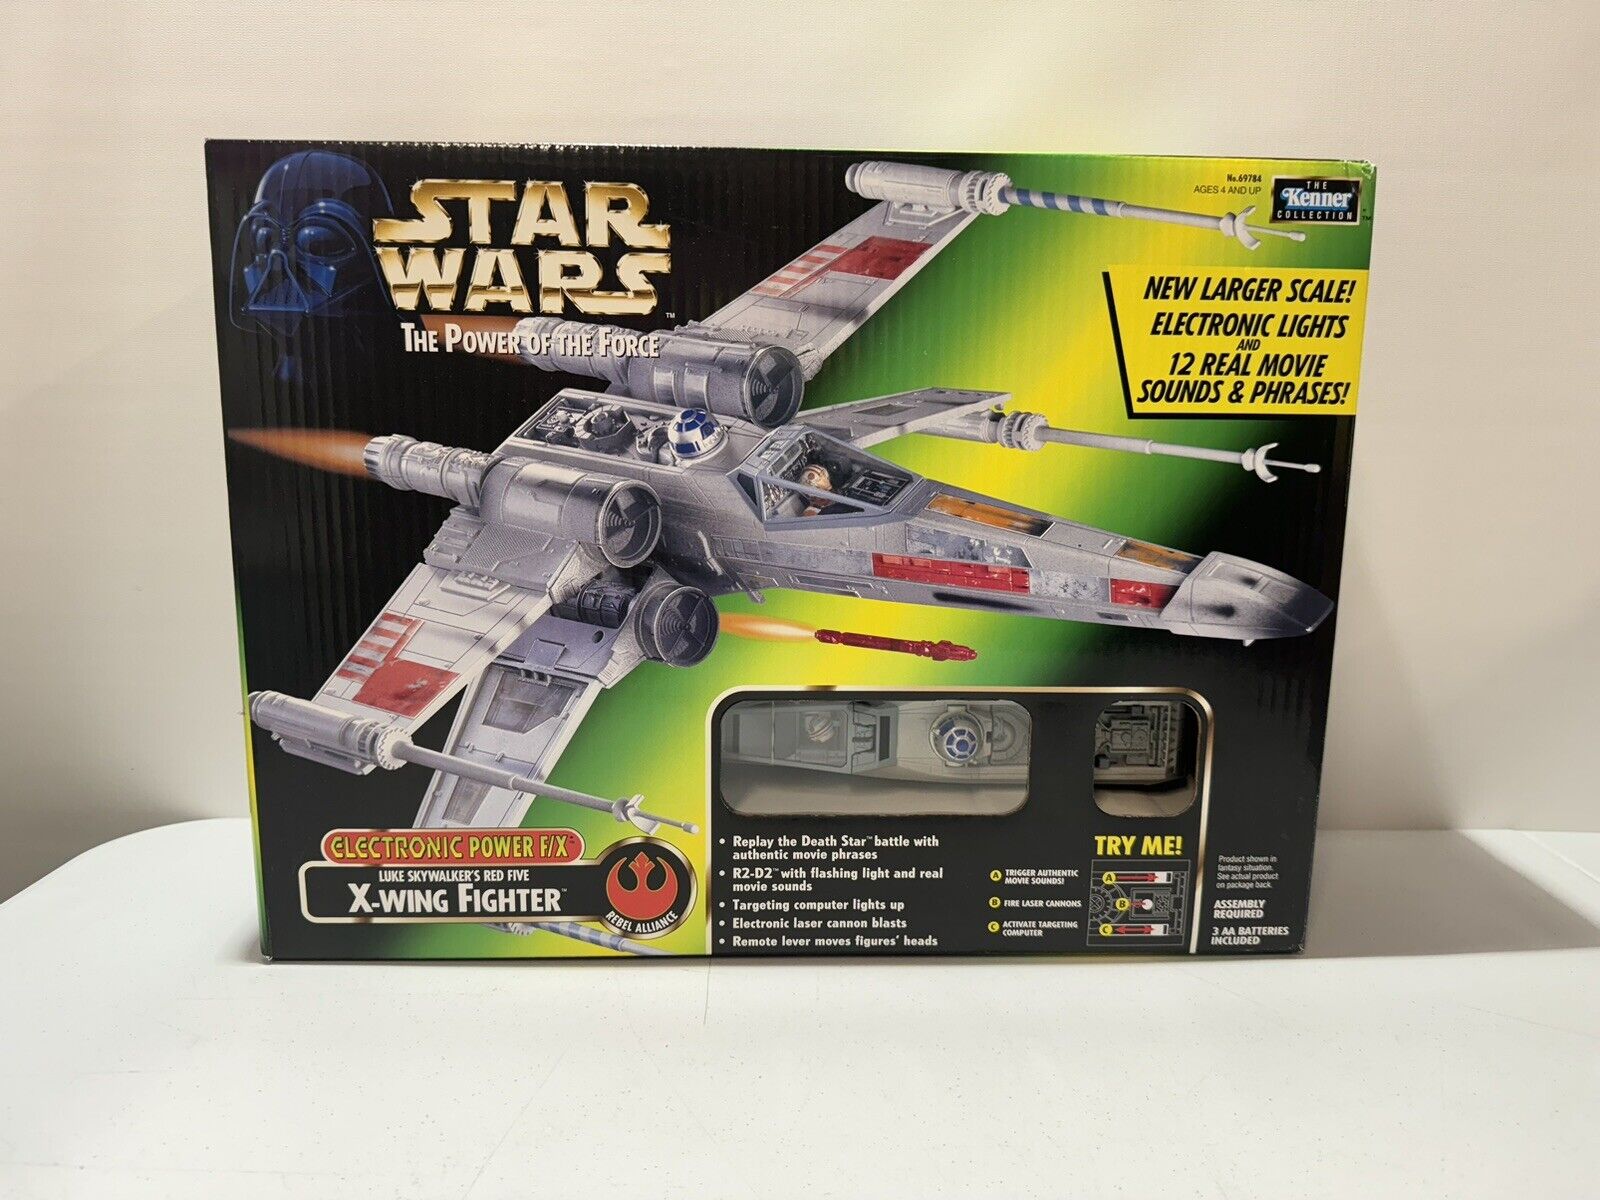 1997 Kenner Star Wars Power Of The Force Electronic Power X-Wing Fighter Toy New